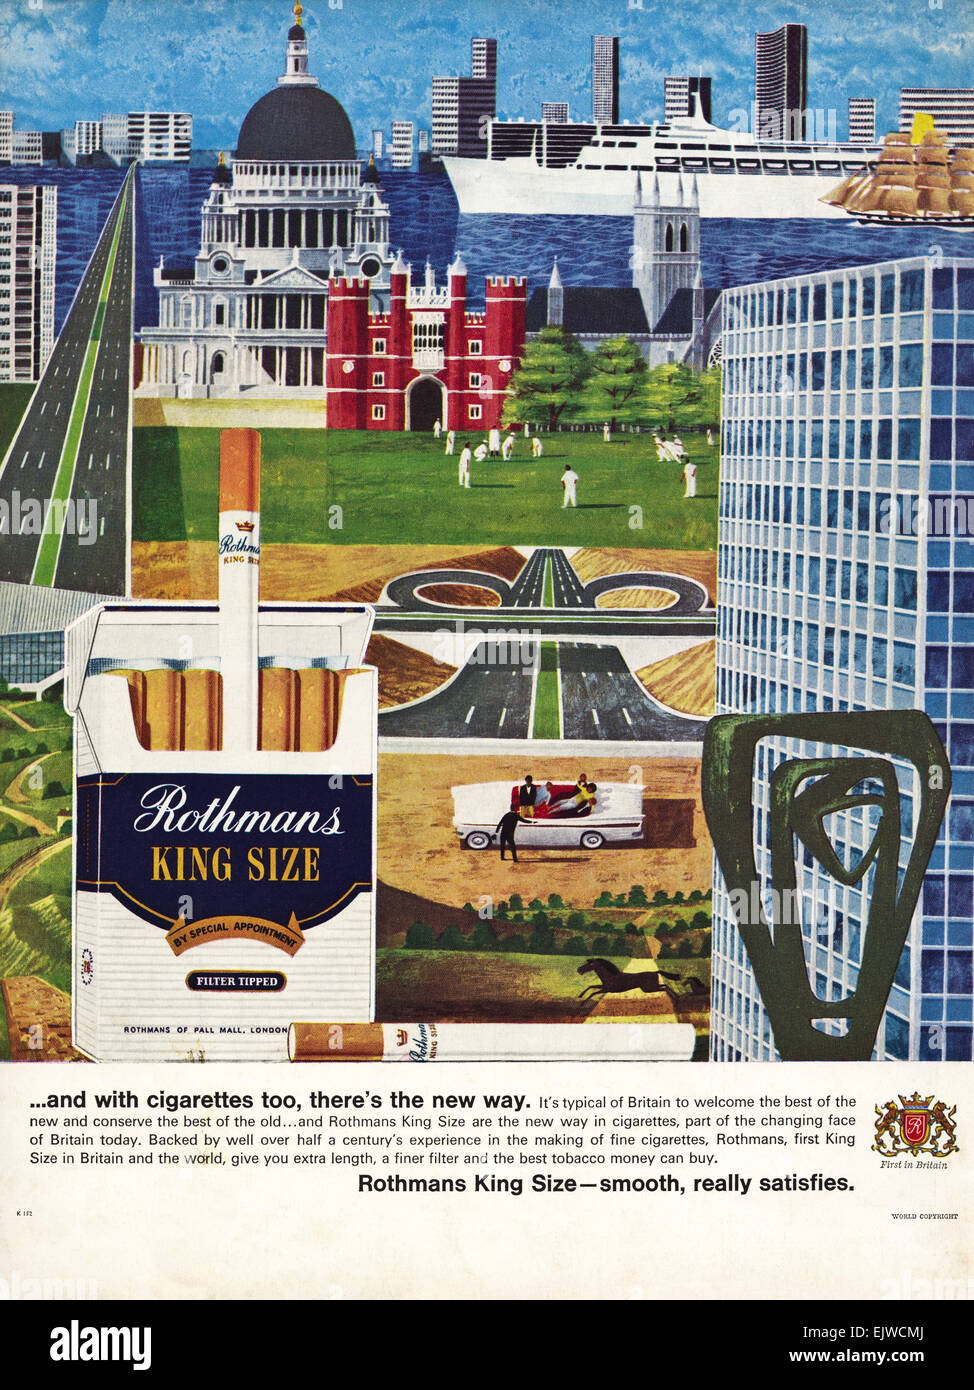 1960s advertisement magazine advert for ROTHMANS KING SIZE cigarettes dated 1964 Stock Photo